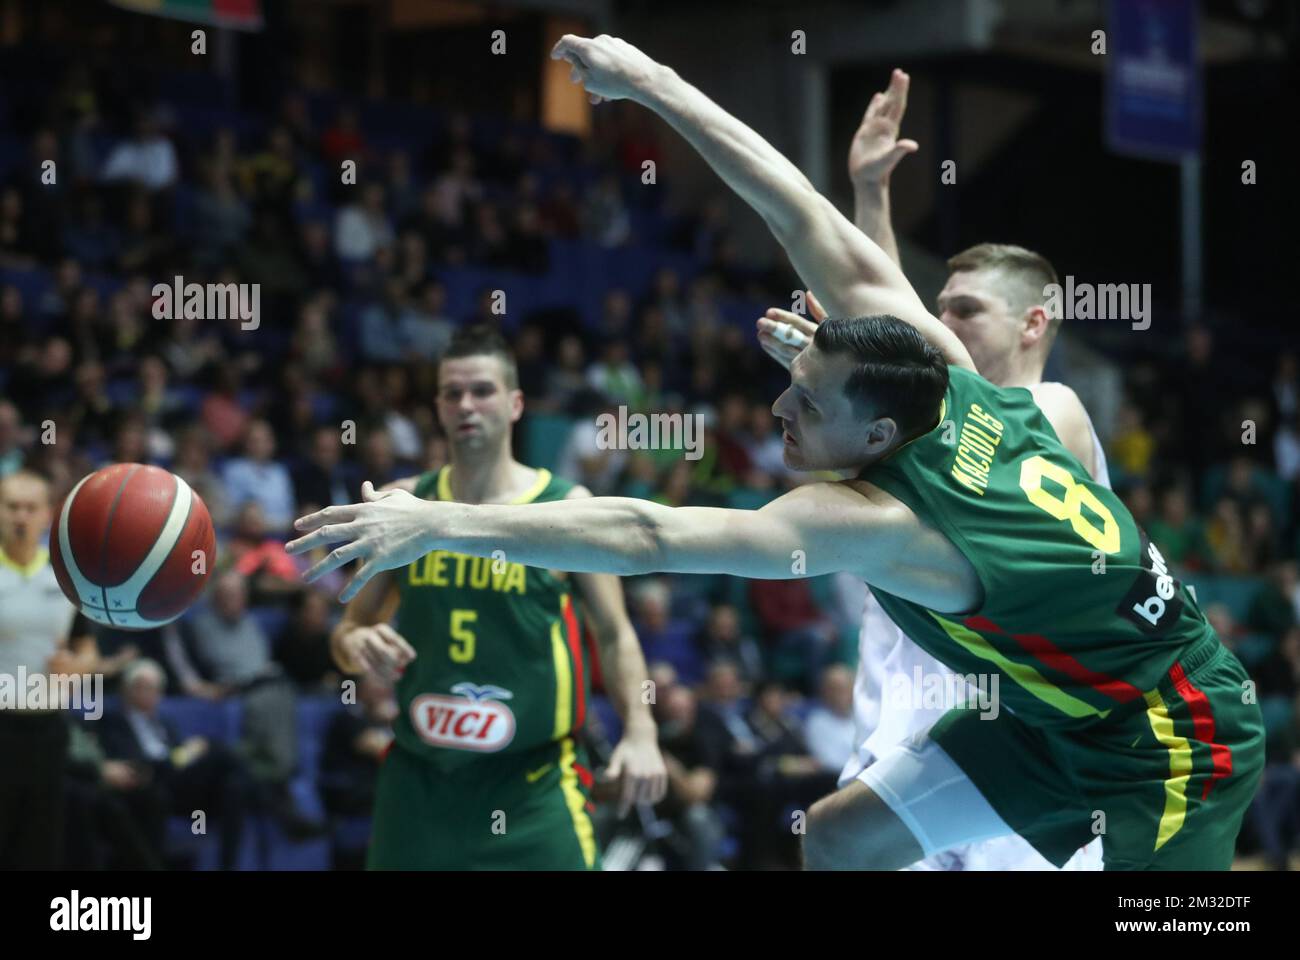 Belgium's Maxime De Zeeuw and Lithuania's Jonas Maciulis fight for the ball during the match between the Belgian Lions and Lithuania, game one of six in group C of the qualifications for the 2021 European Championships, Friday 21 February 2020, at the Mons Arena in Jemappe. BELGA PHOTO VIRGINIE LEFOUR Stock Photo